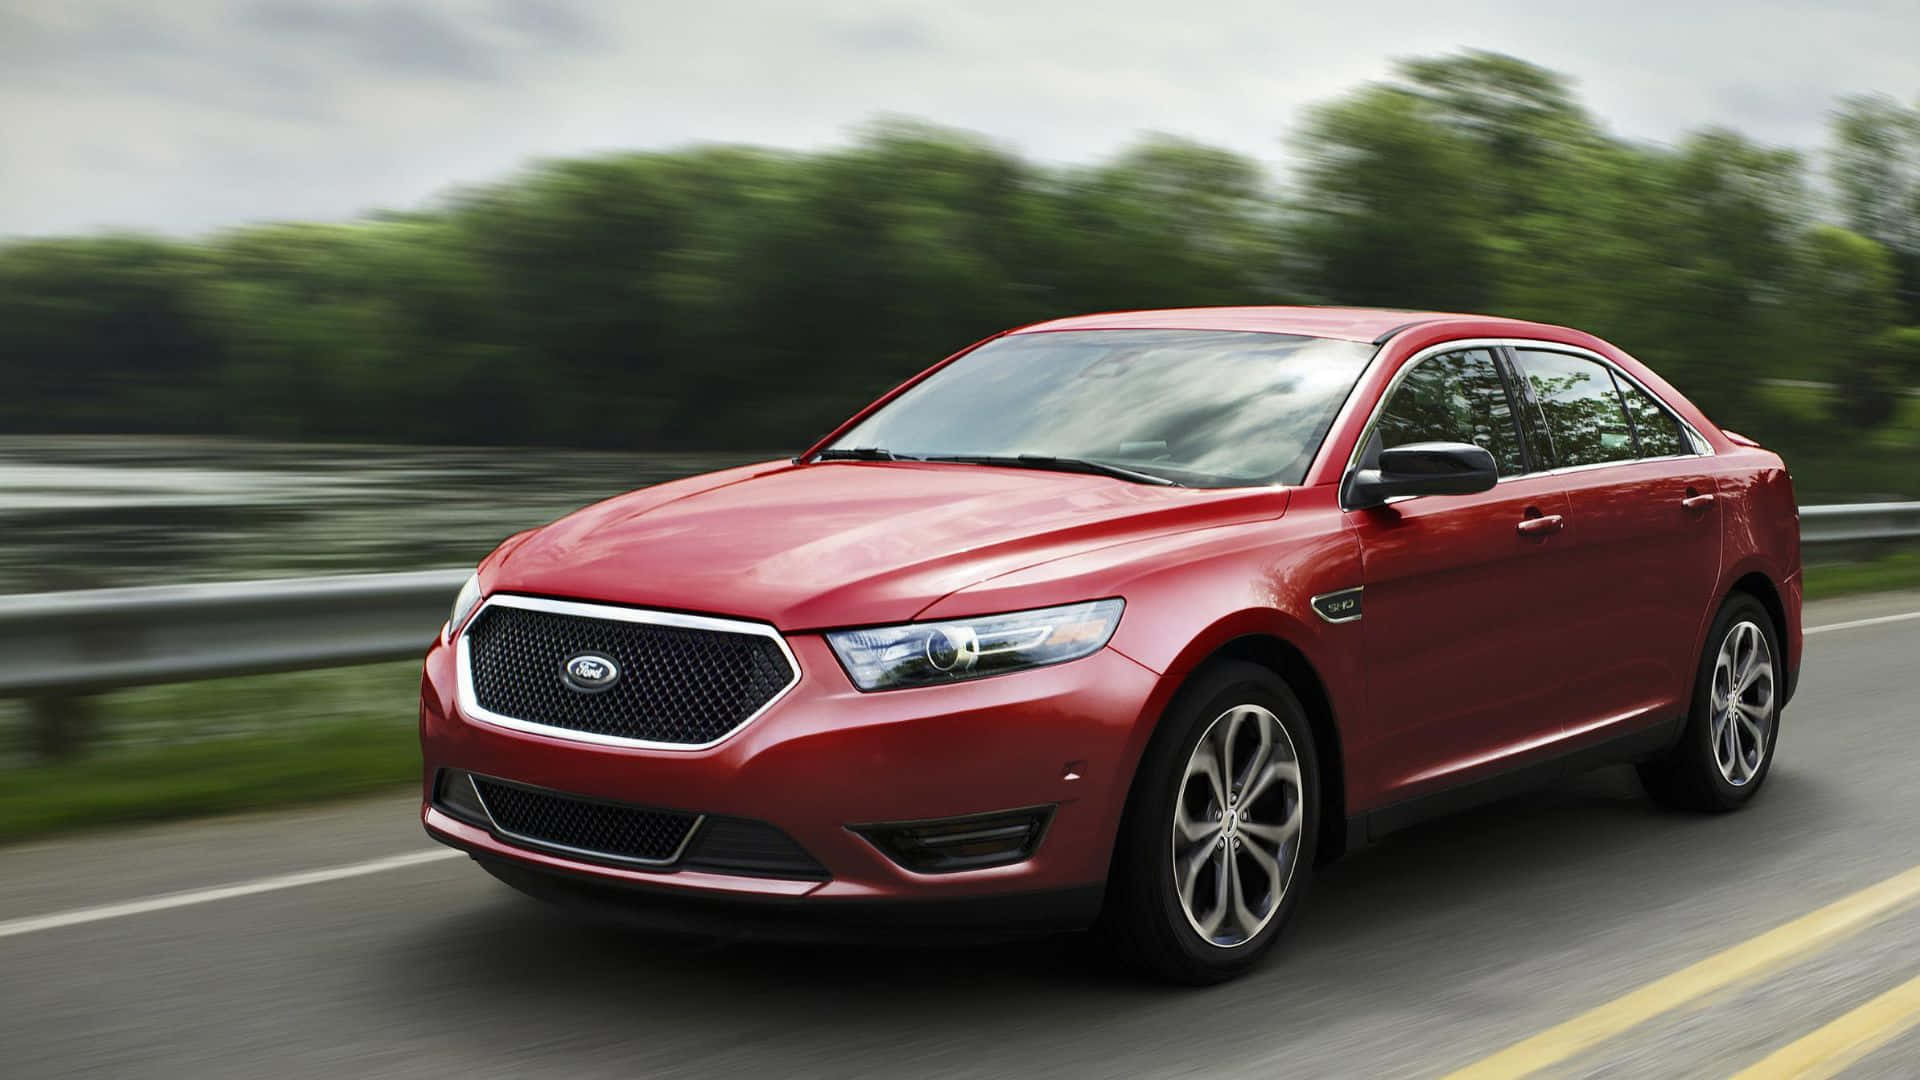 Sleek and Stylish Ford Taurus in Motion Wallpaper